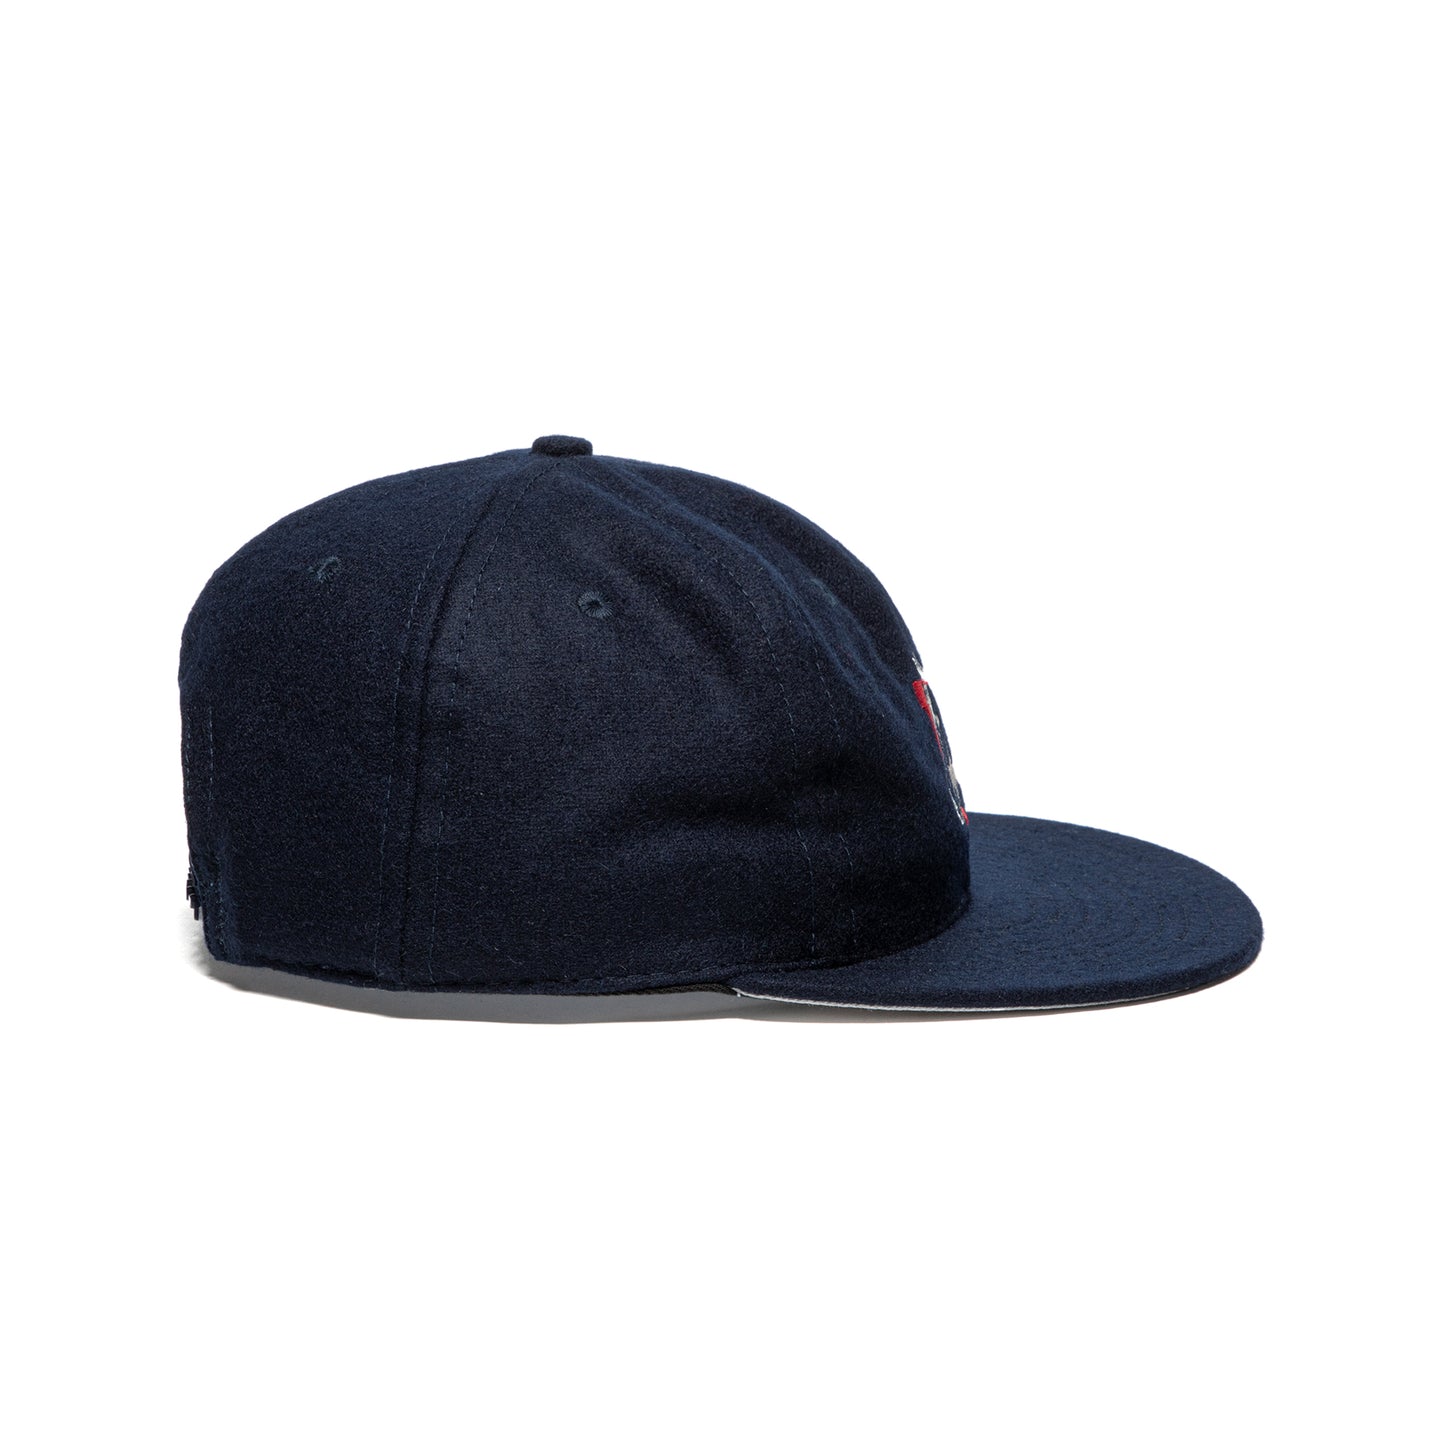 ONE OF THESE DAYS Ebbets Hat (Navy)